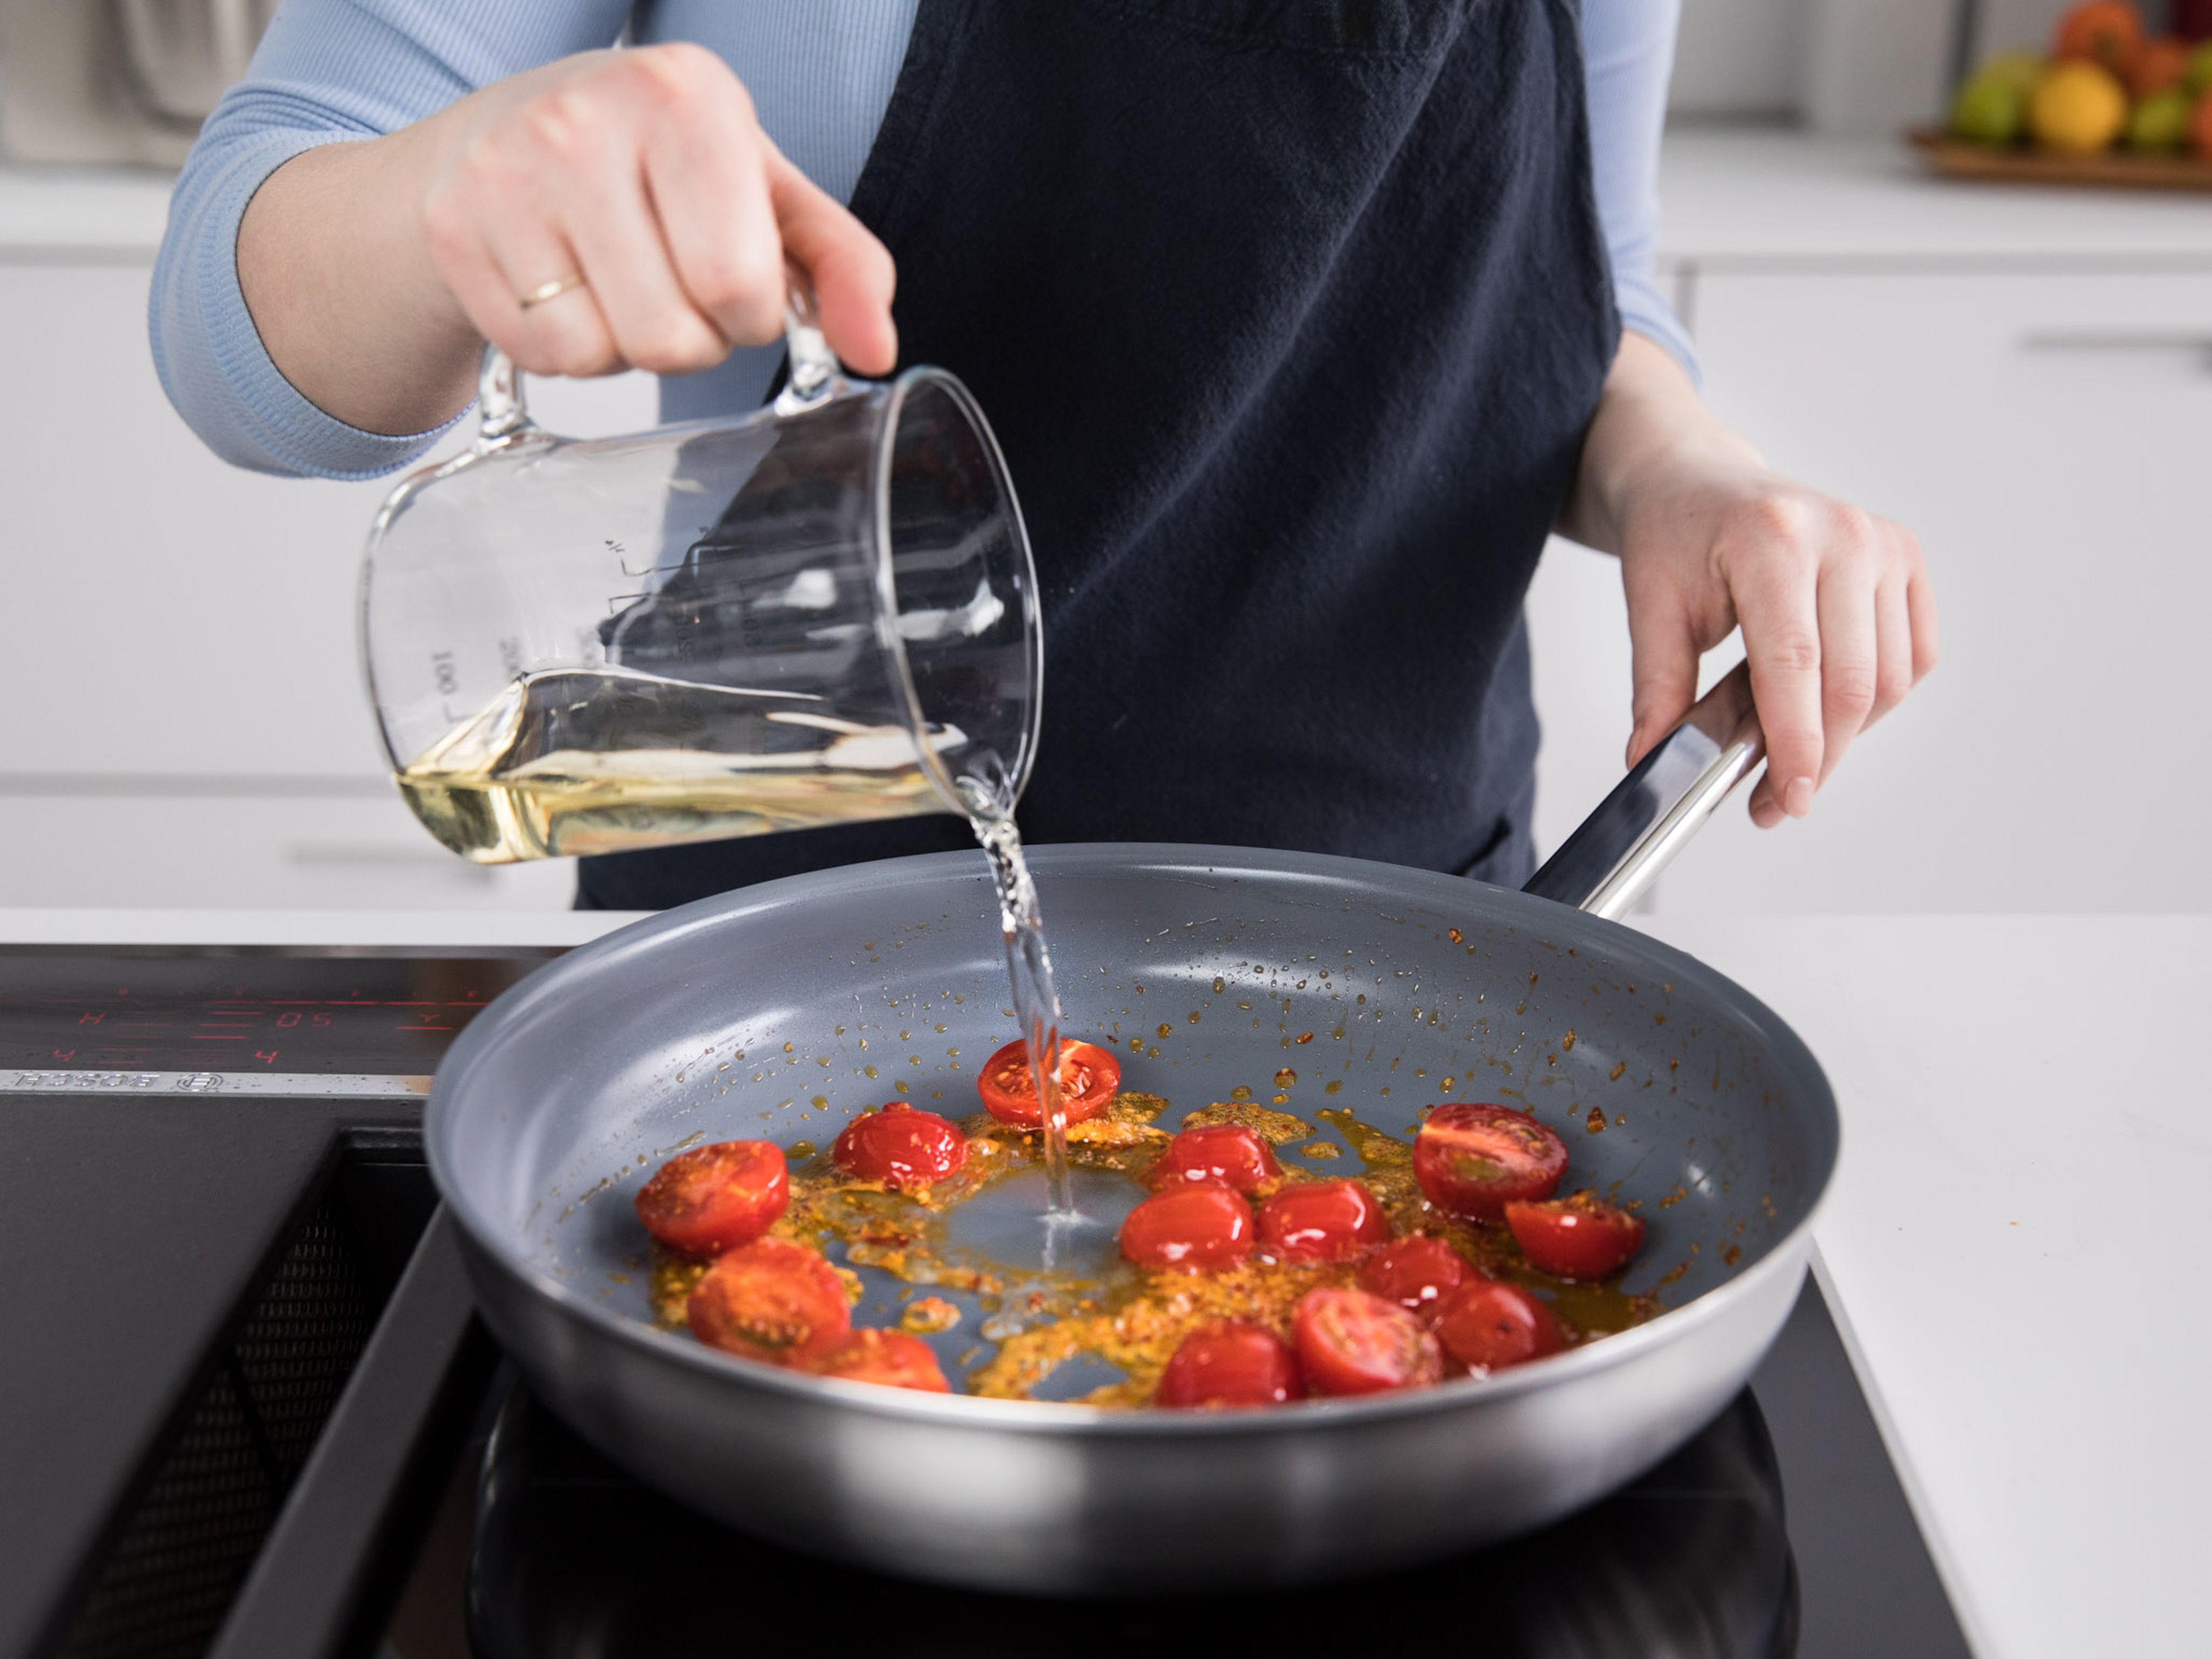 Heat olive oil in a frying pan over medium heat. Add garlic and shallot and fry until translucent. Add tomato paste and cherry tomatoes and keep frying for approx. 1 – 2 min. or until the tomato paste starts to stick to the pan. Deglaze with white wine and let simmer for approx. 5 min.